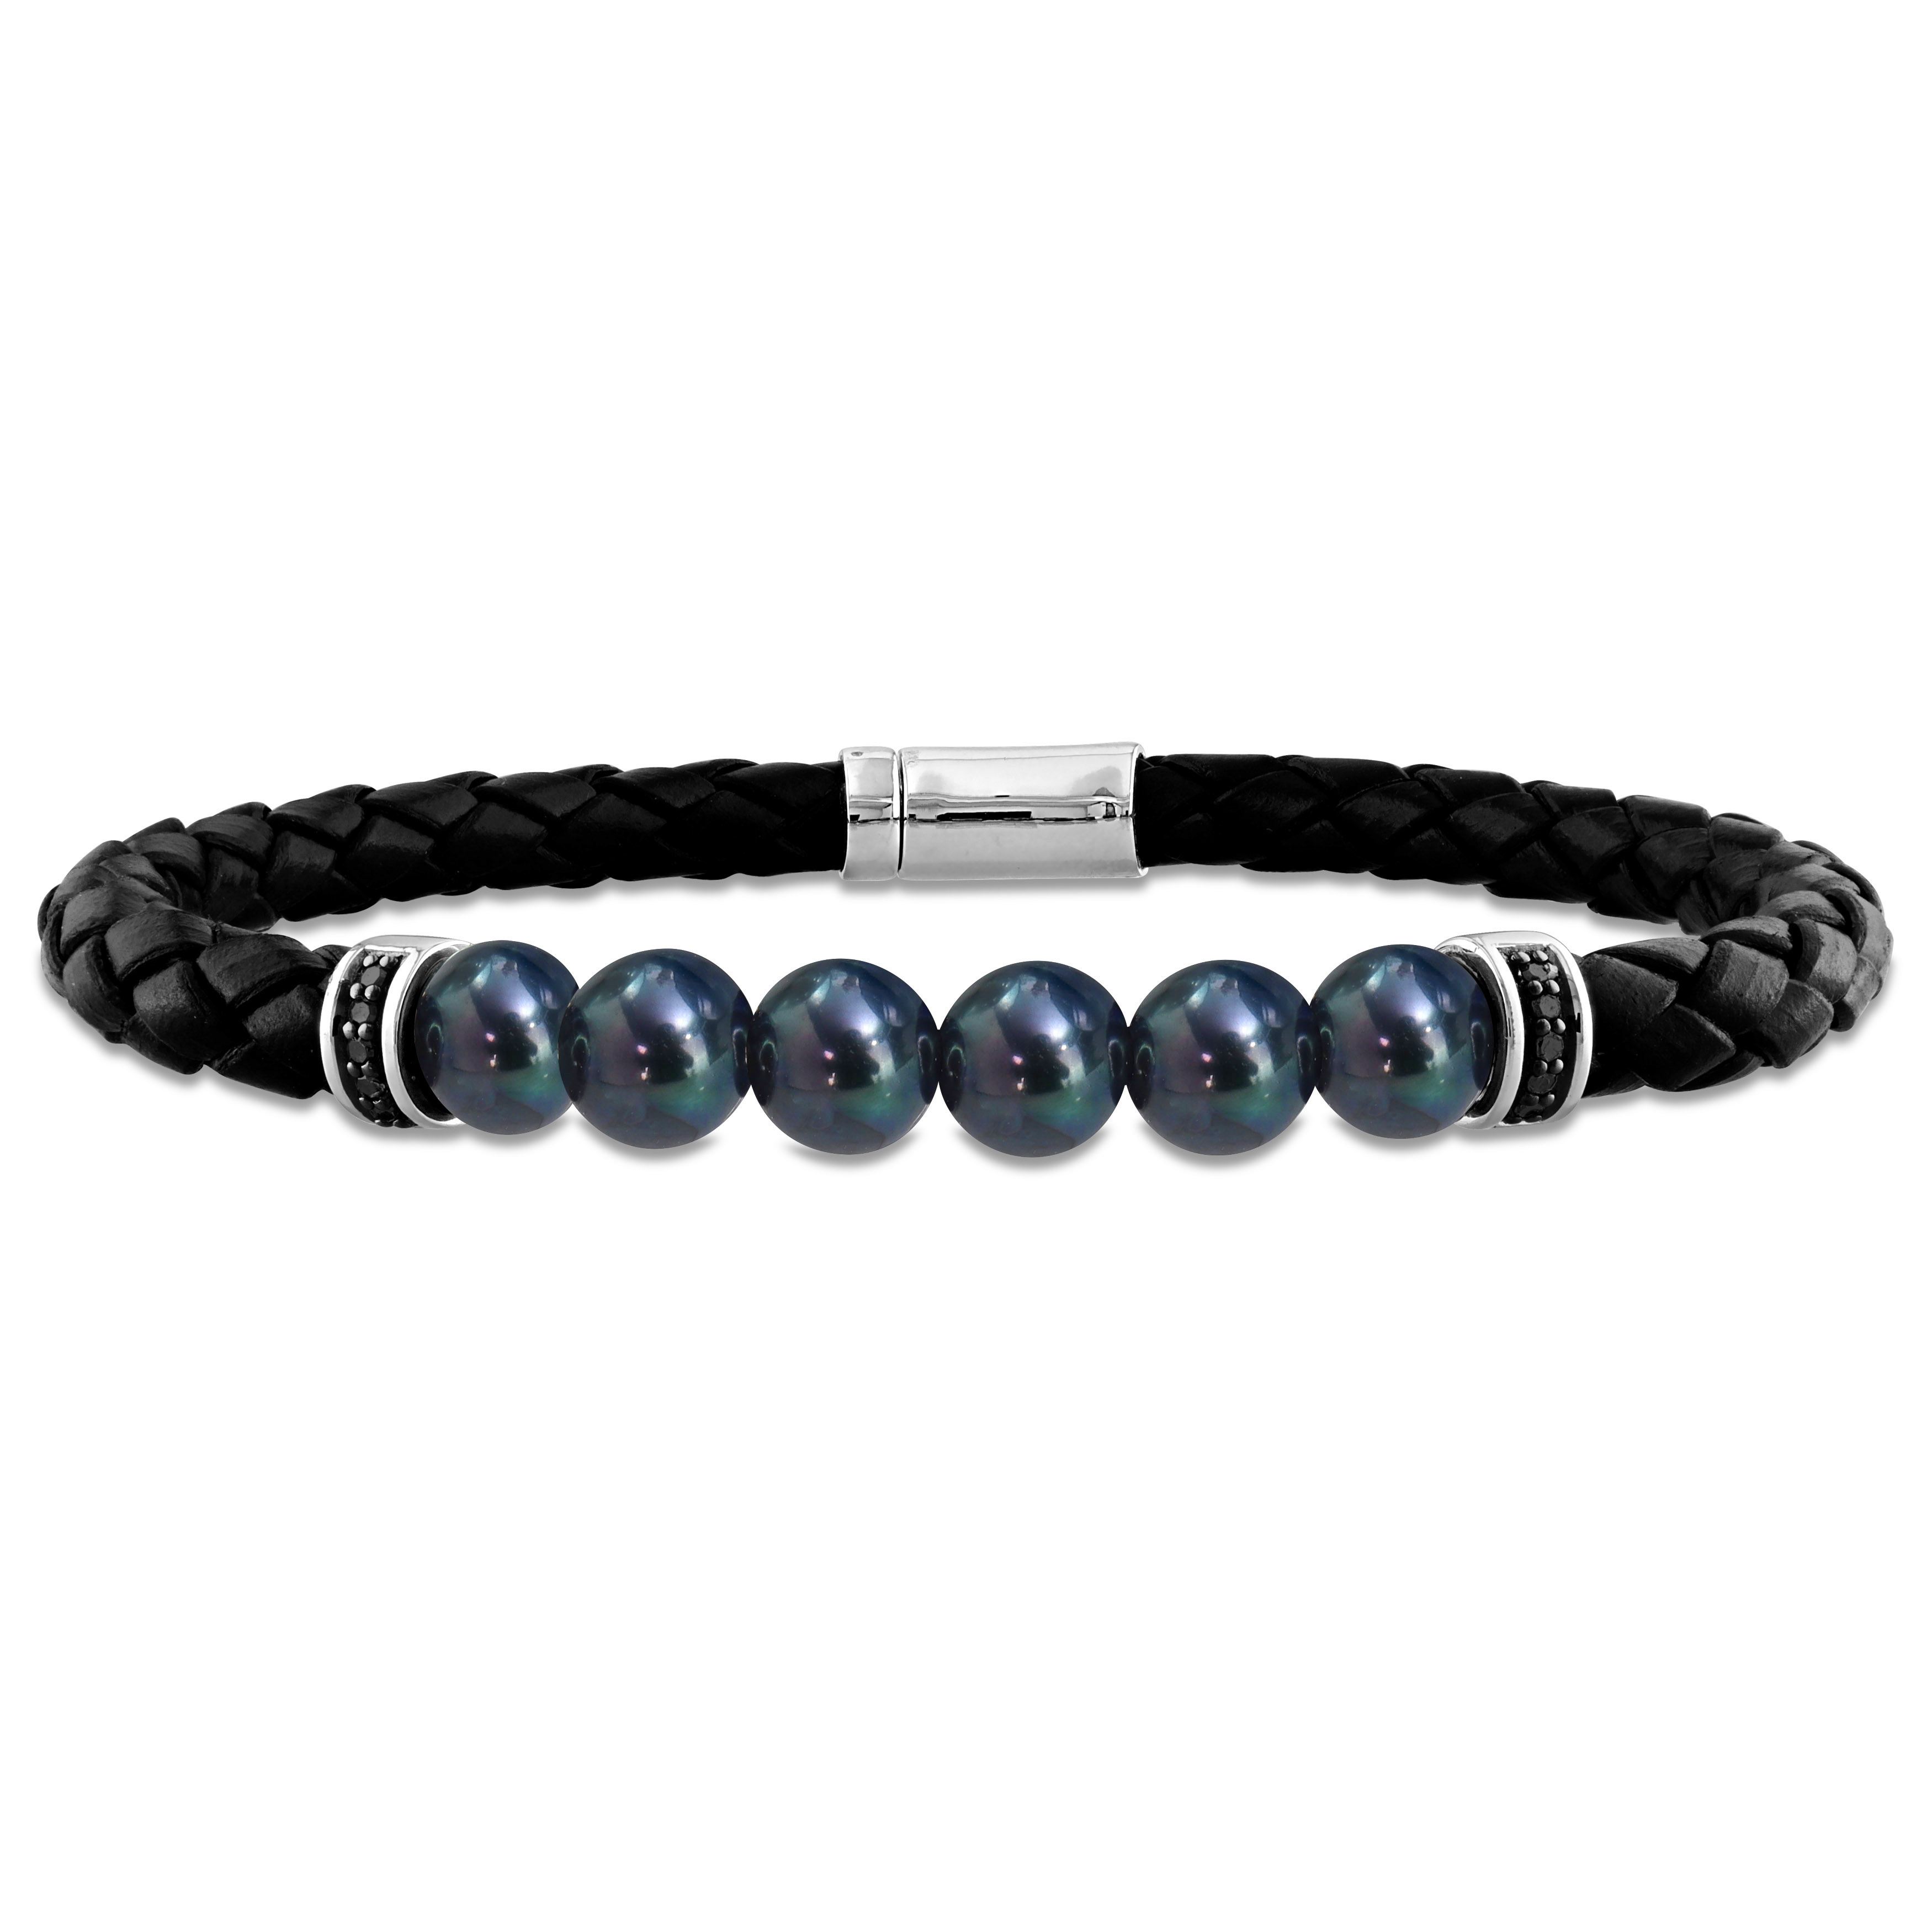 7.5-8mm Men's Black Cultured Freshwater Pearl Braided Black Leather Bracelet with Diamond Accents - 9 in.